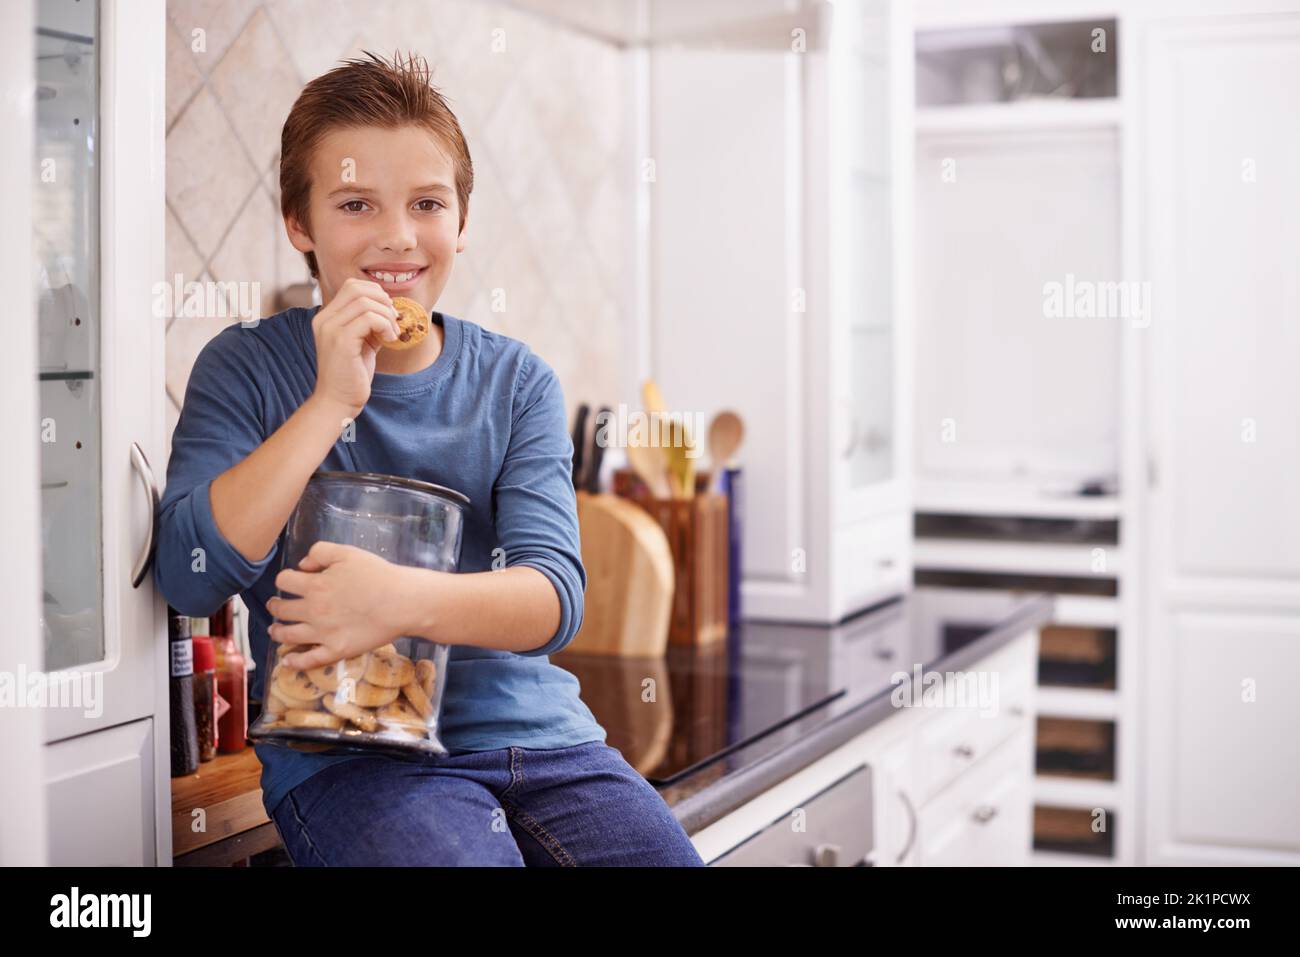 One more wont hurt. A young boy eating a cookie while holding a cookie jar. Stock Photo